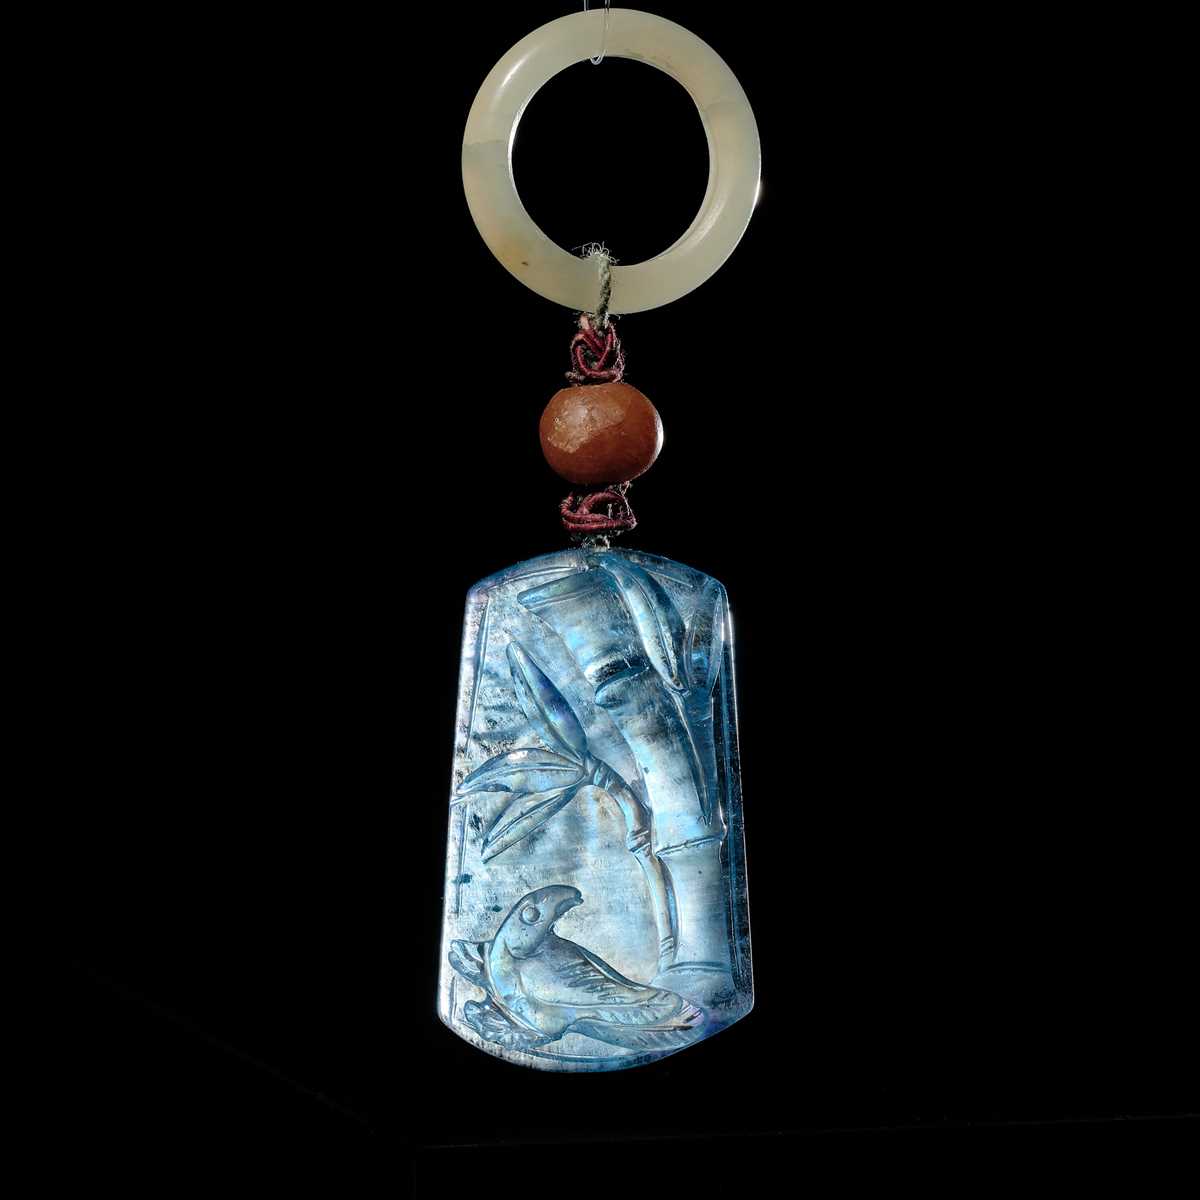 Lot 35 - A CARVED AQUAMARINE AND JADE PENDANT, LATE QING DYNASTY